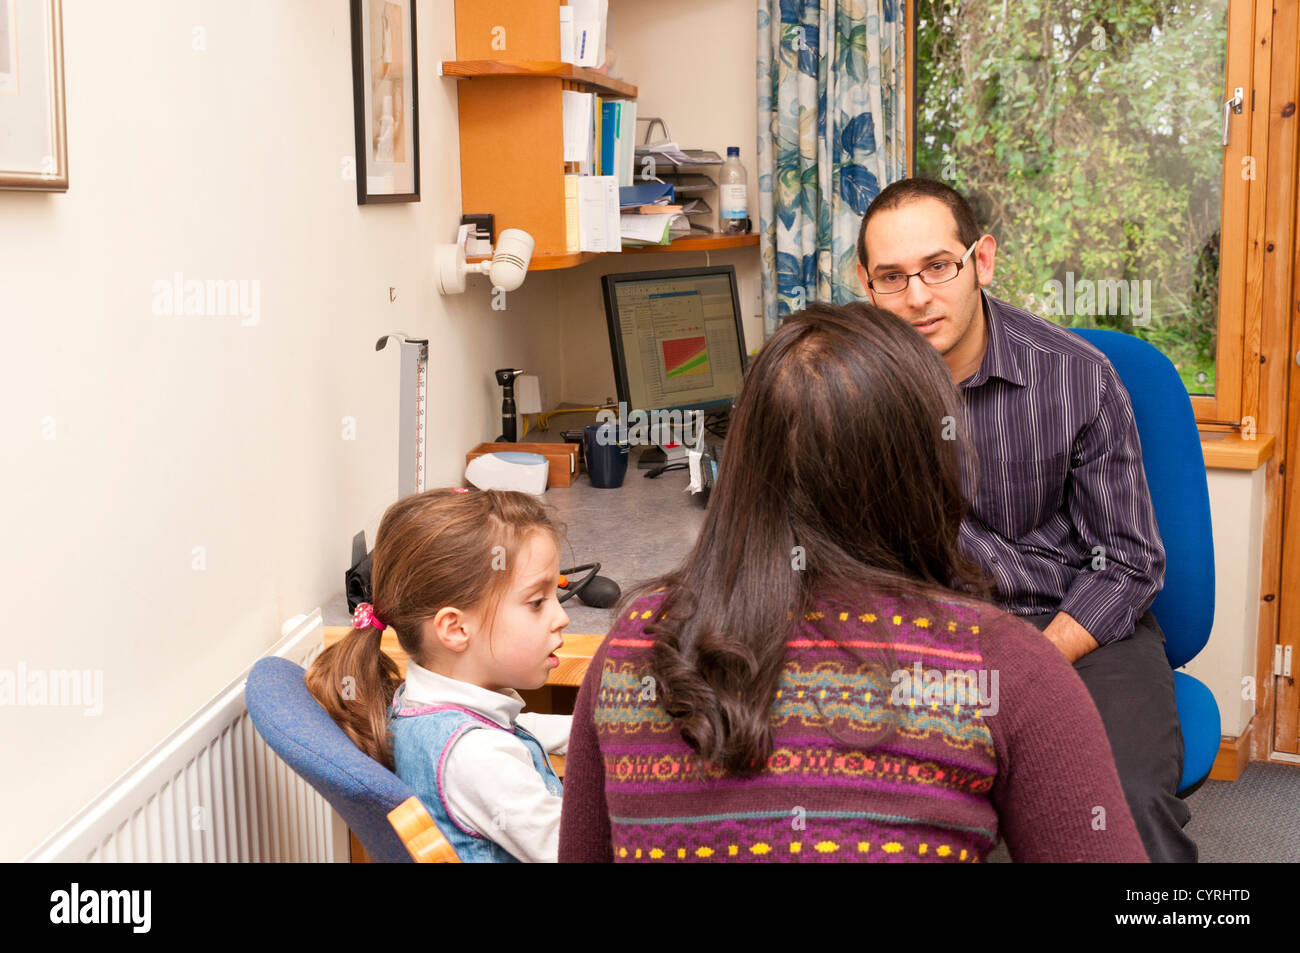 GP Doctor surgery patient consultation UK. Doctor seeing young child with her Mother in surgery. Stock Photo